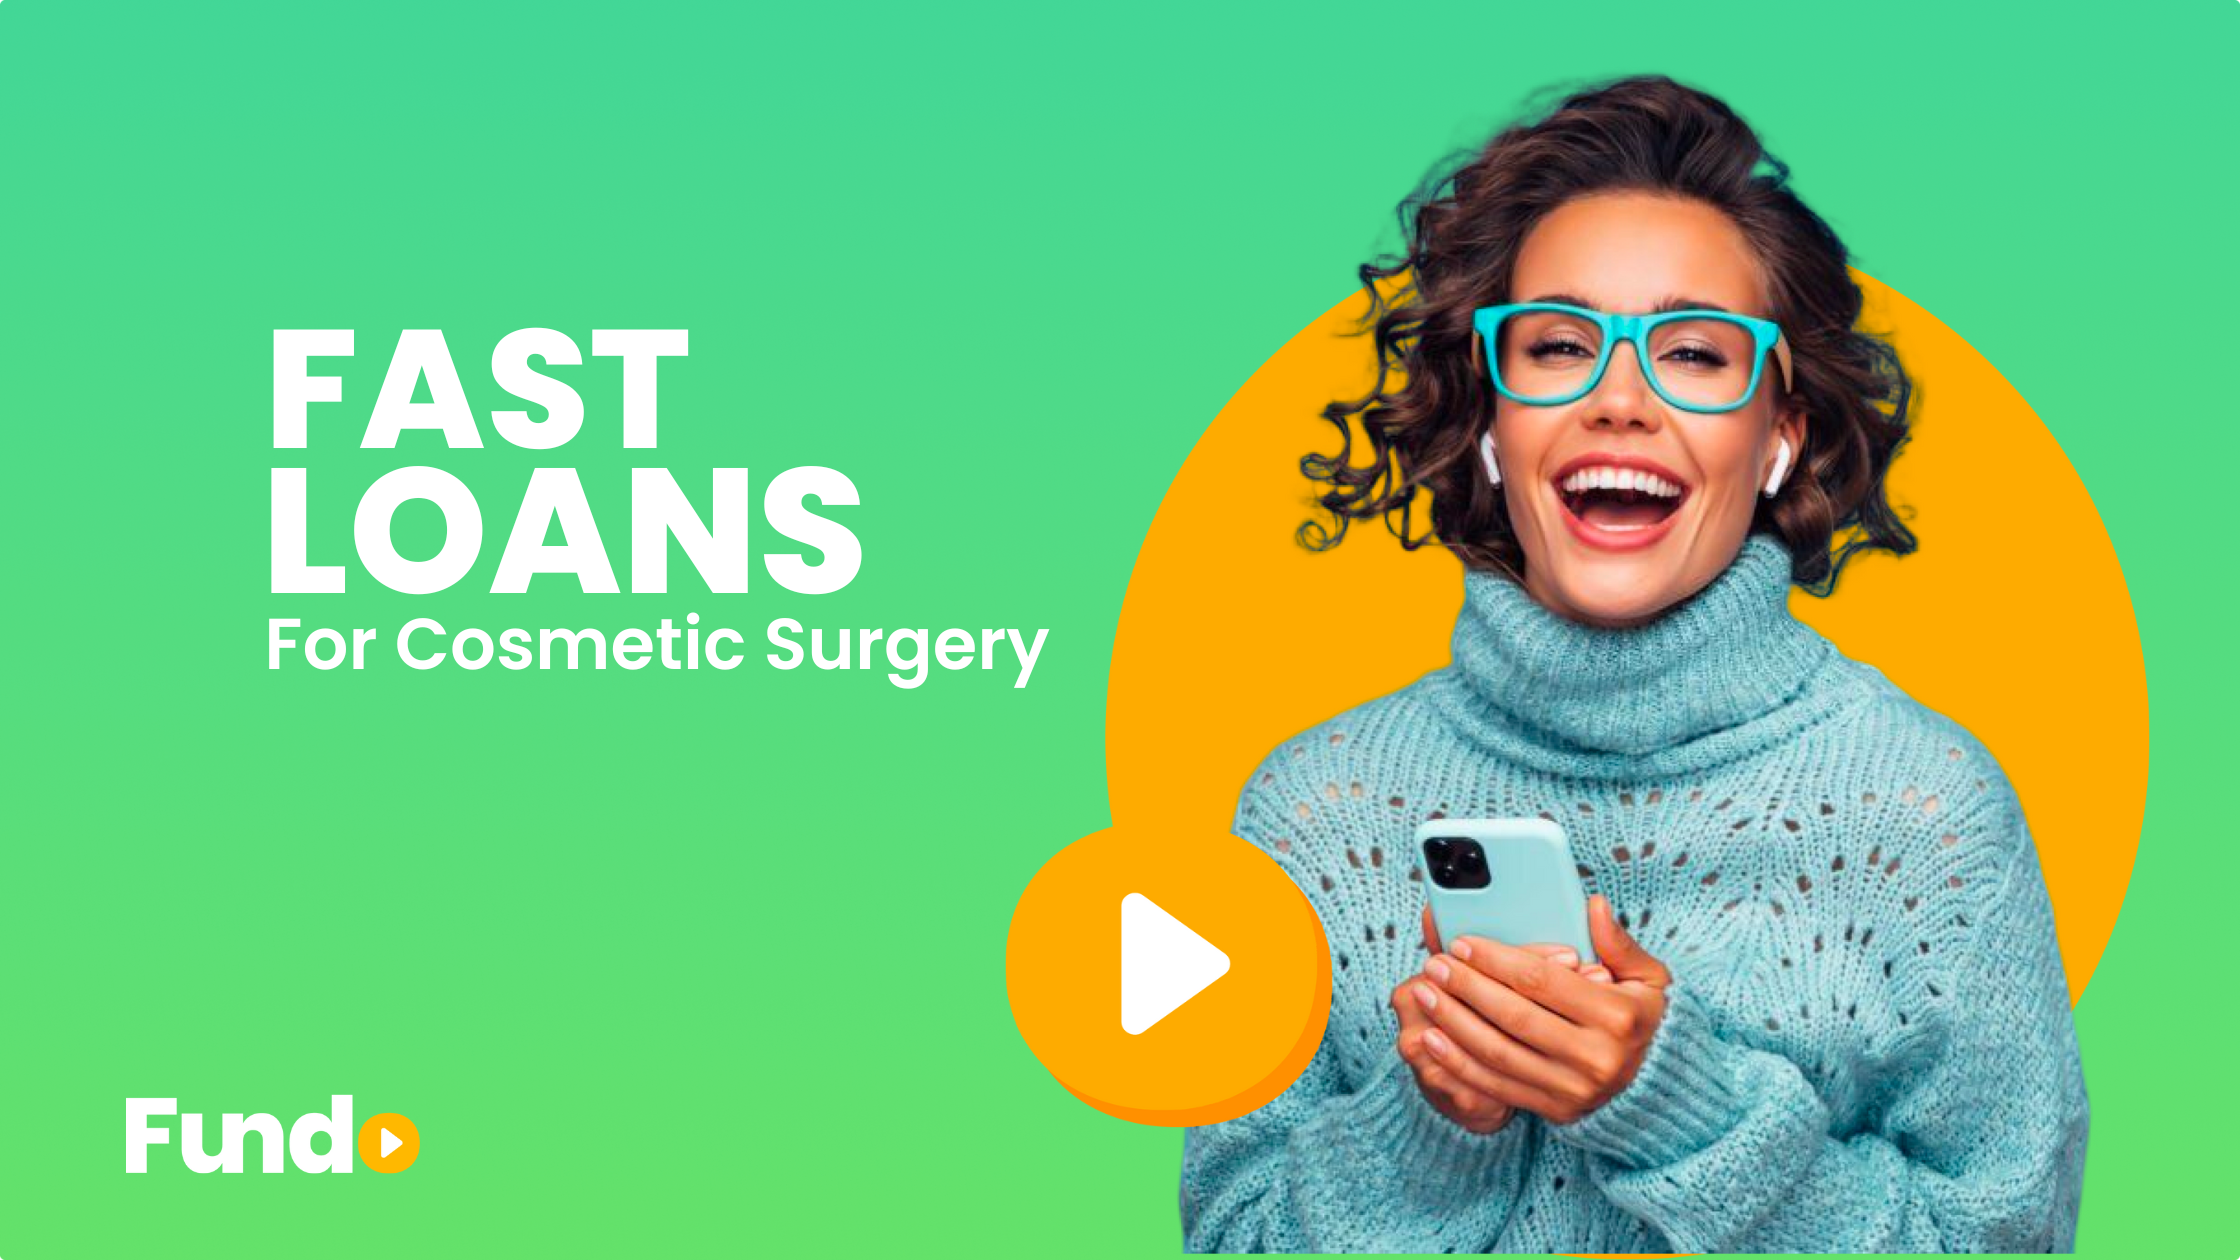 Fast loans for Cosmetic Surgery? Fundo it!